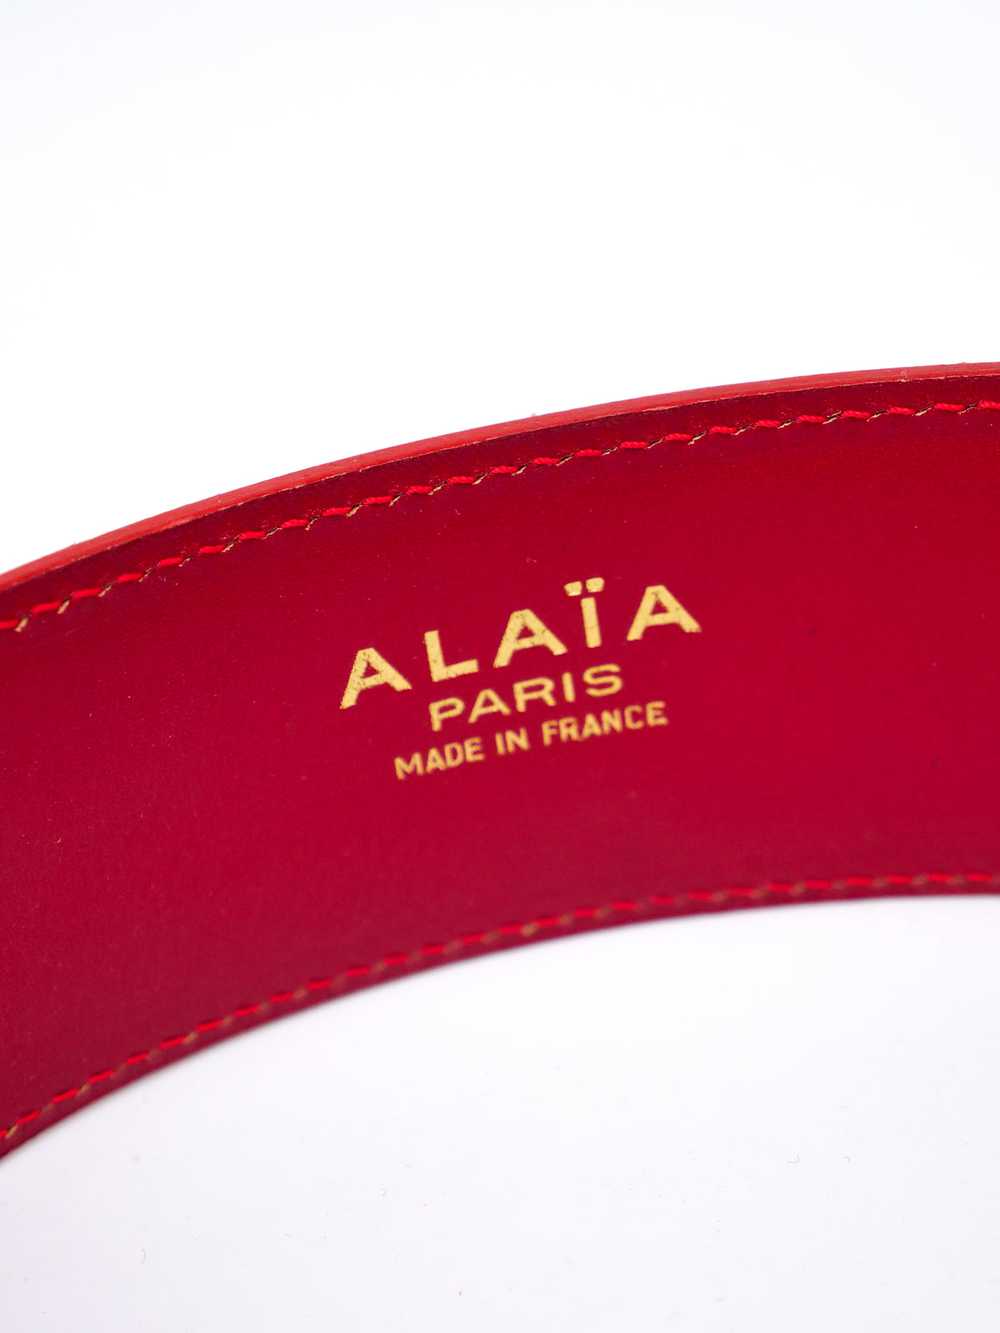 Alaia Perforated Red Leather Belt - image 5